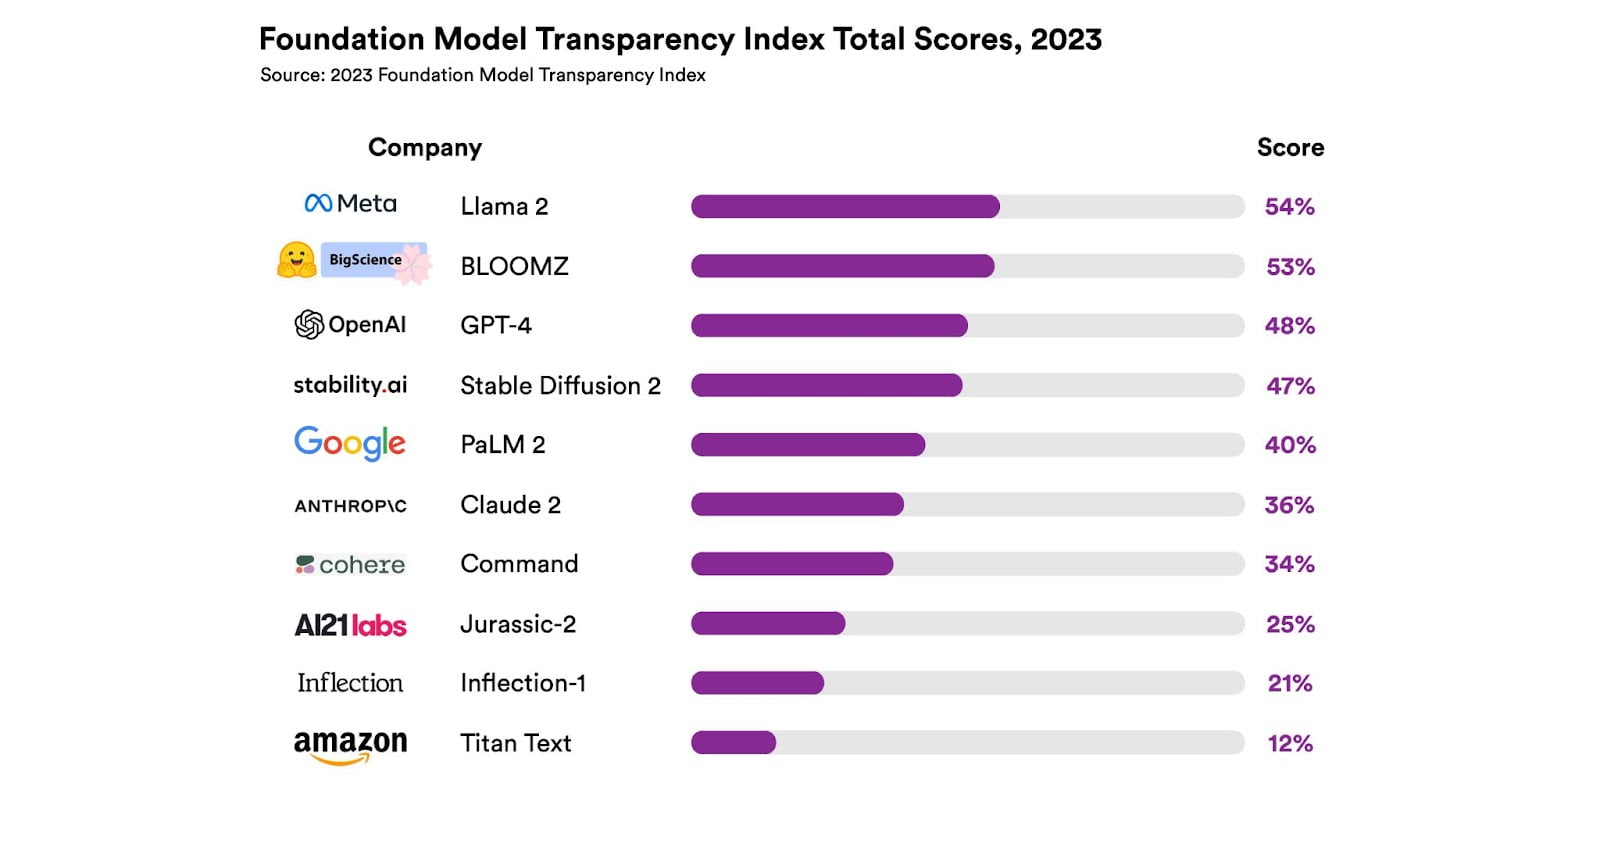 Foundation Model Transparency Index shows lack of transparency among AI companies